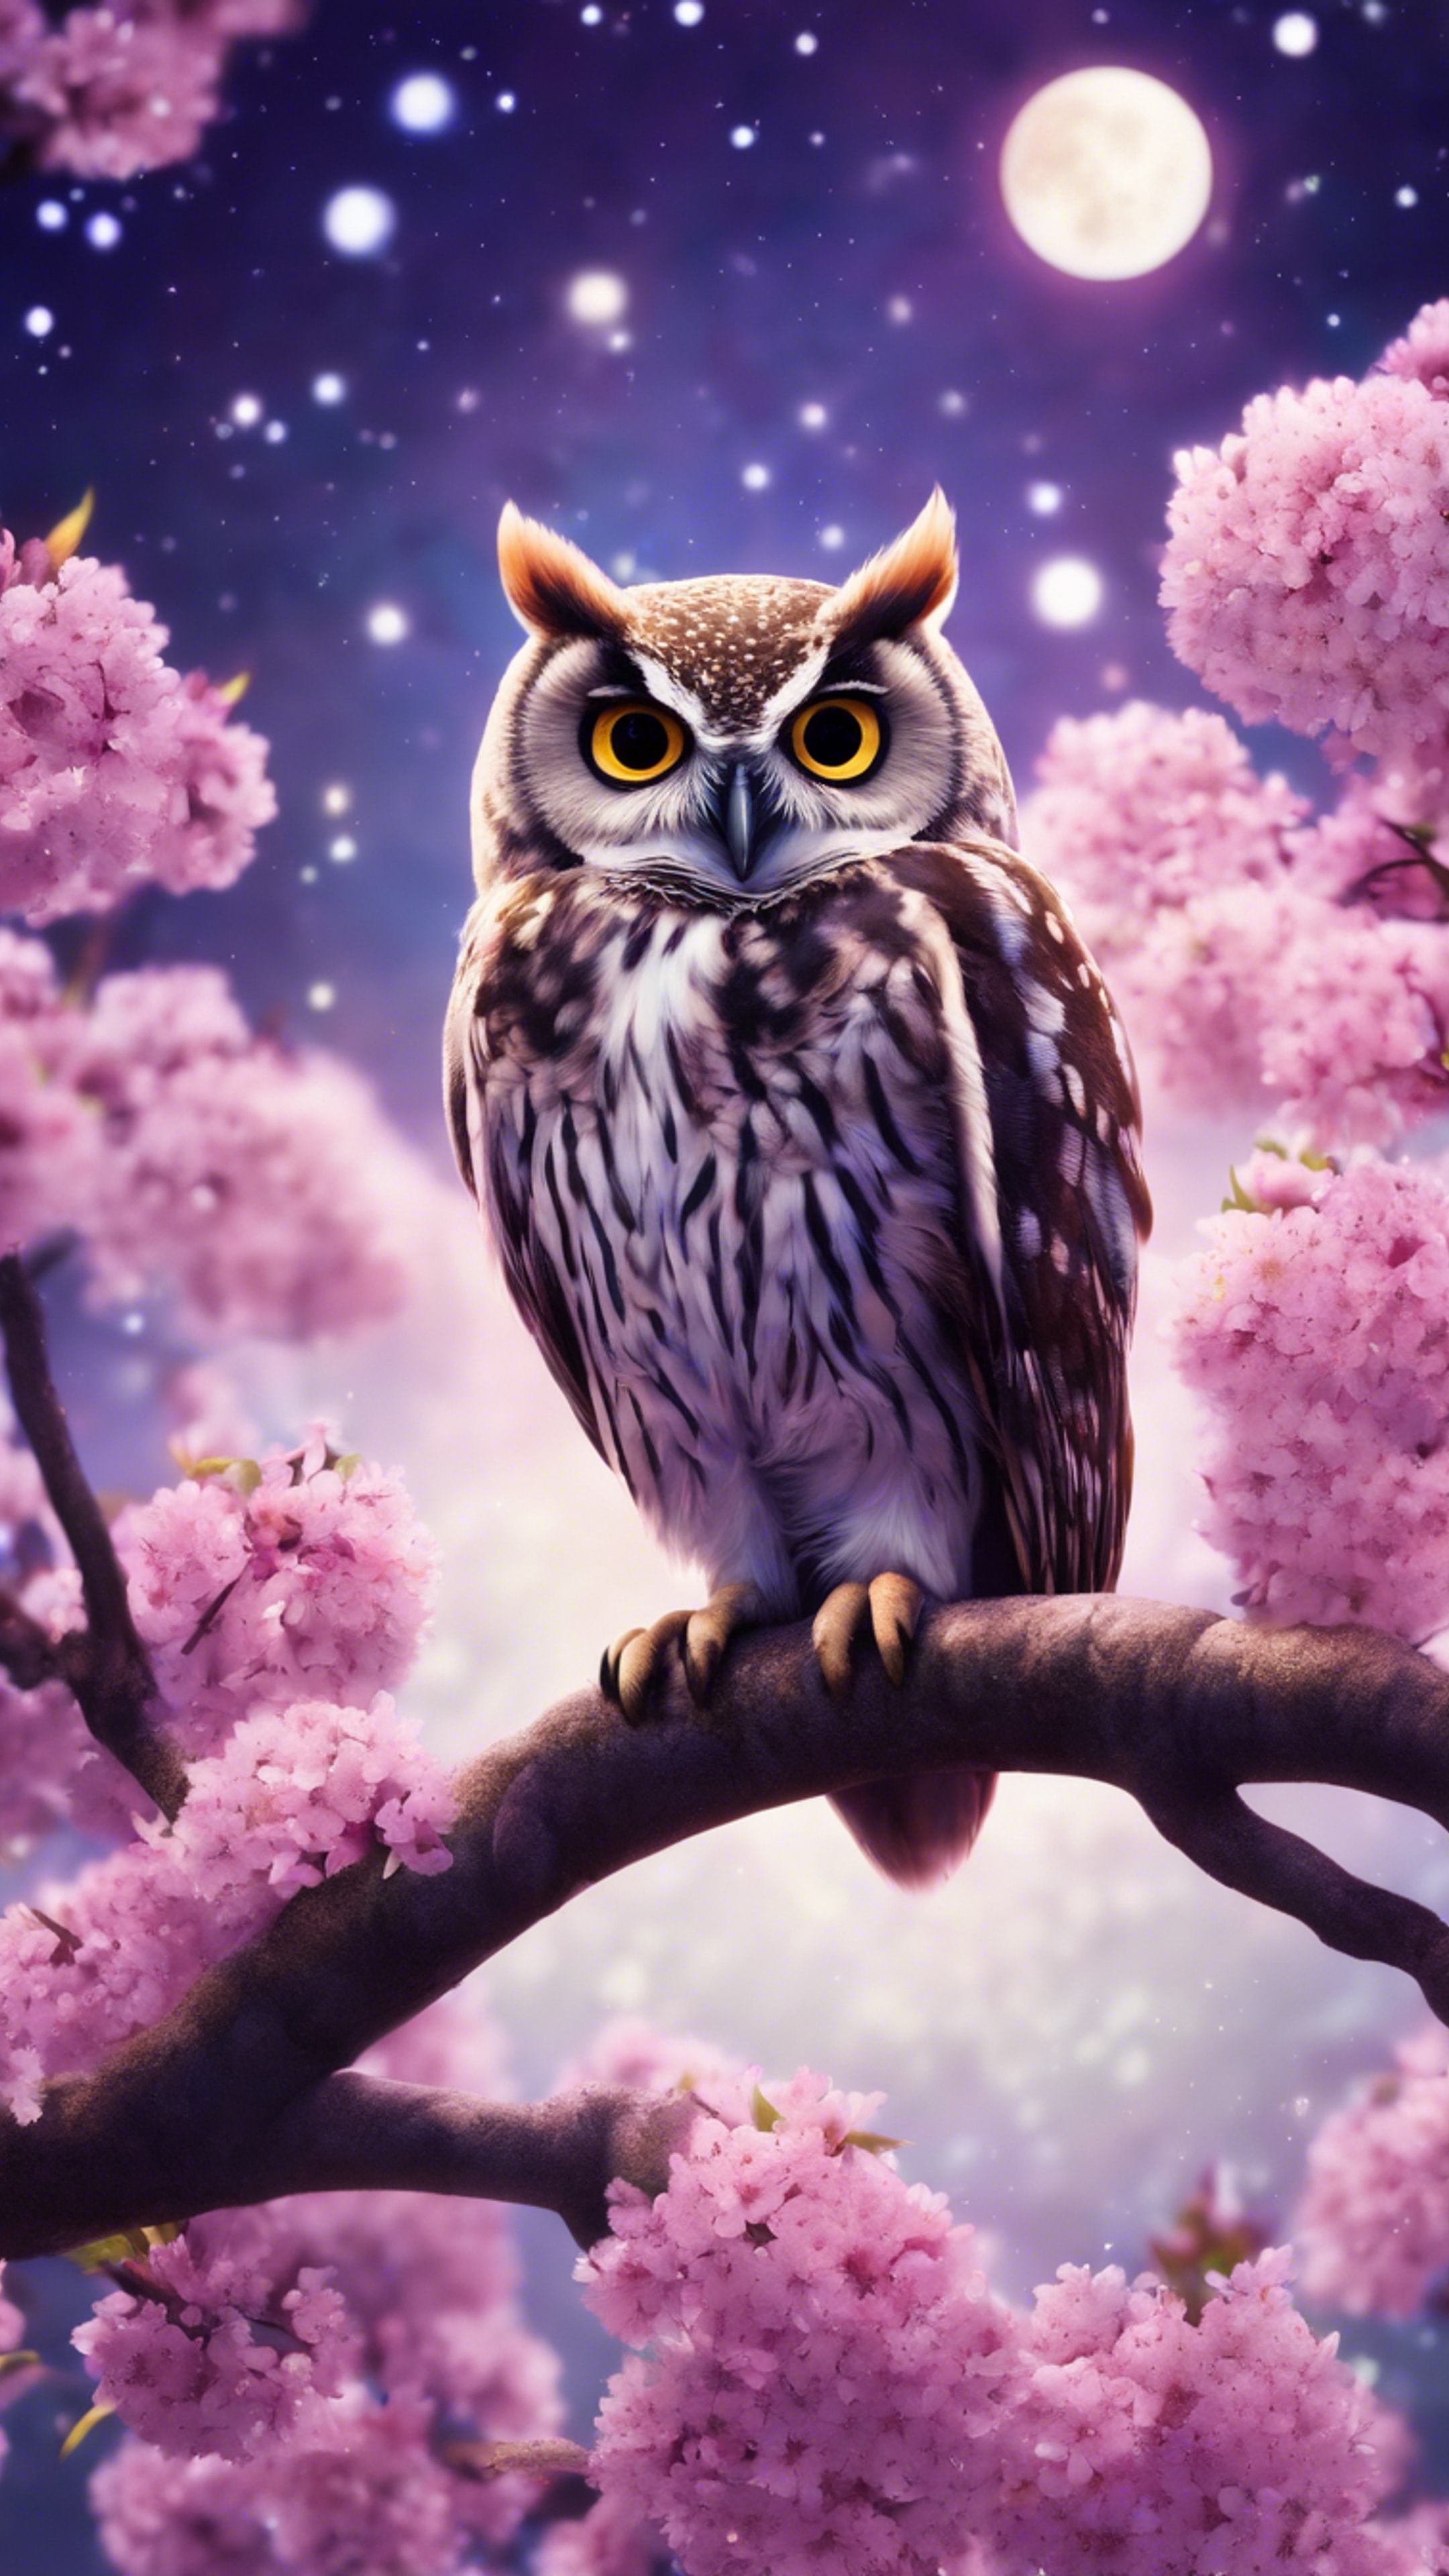 A cute kawaii style owl perched on a cherry blossom tree that blooms vibrant purple flowers, under a moonlit starry night. Валлпапер[d4c437875b7e43ac9353]